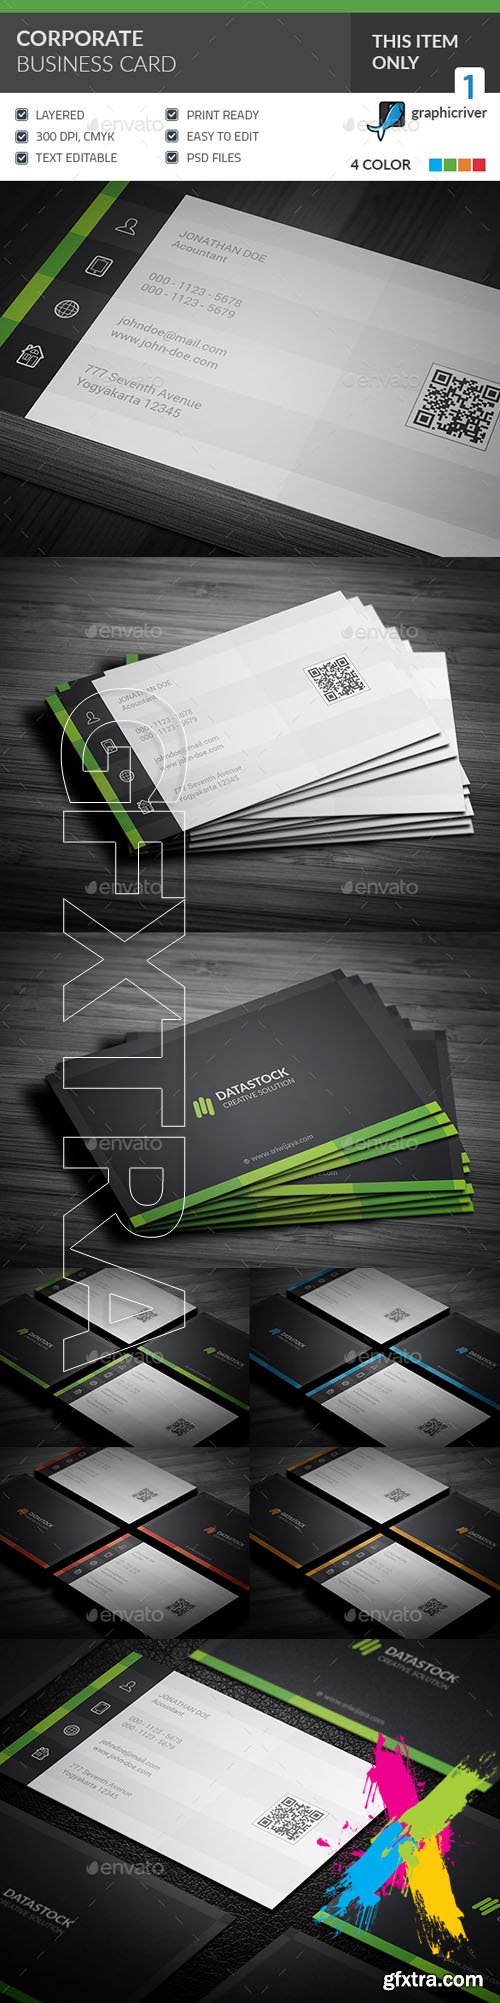 Graphicriver - Corporate Business Card 20167875